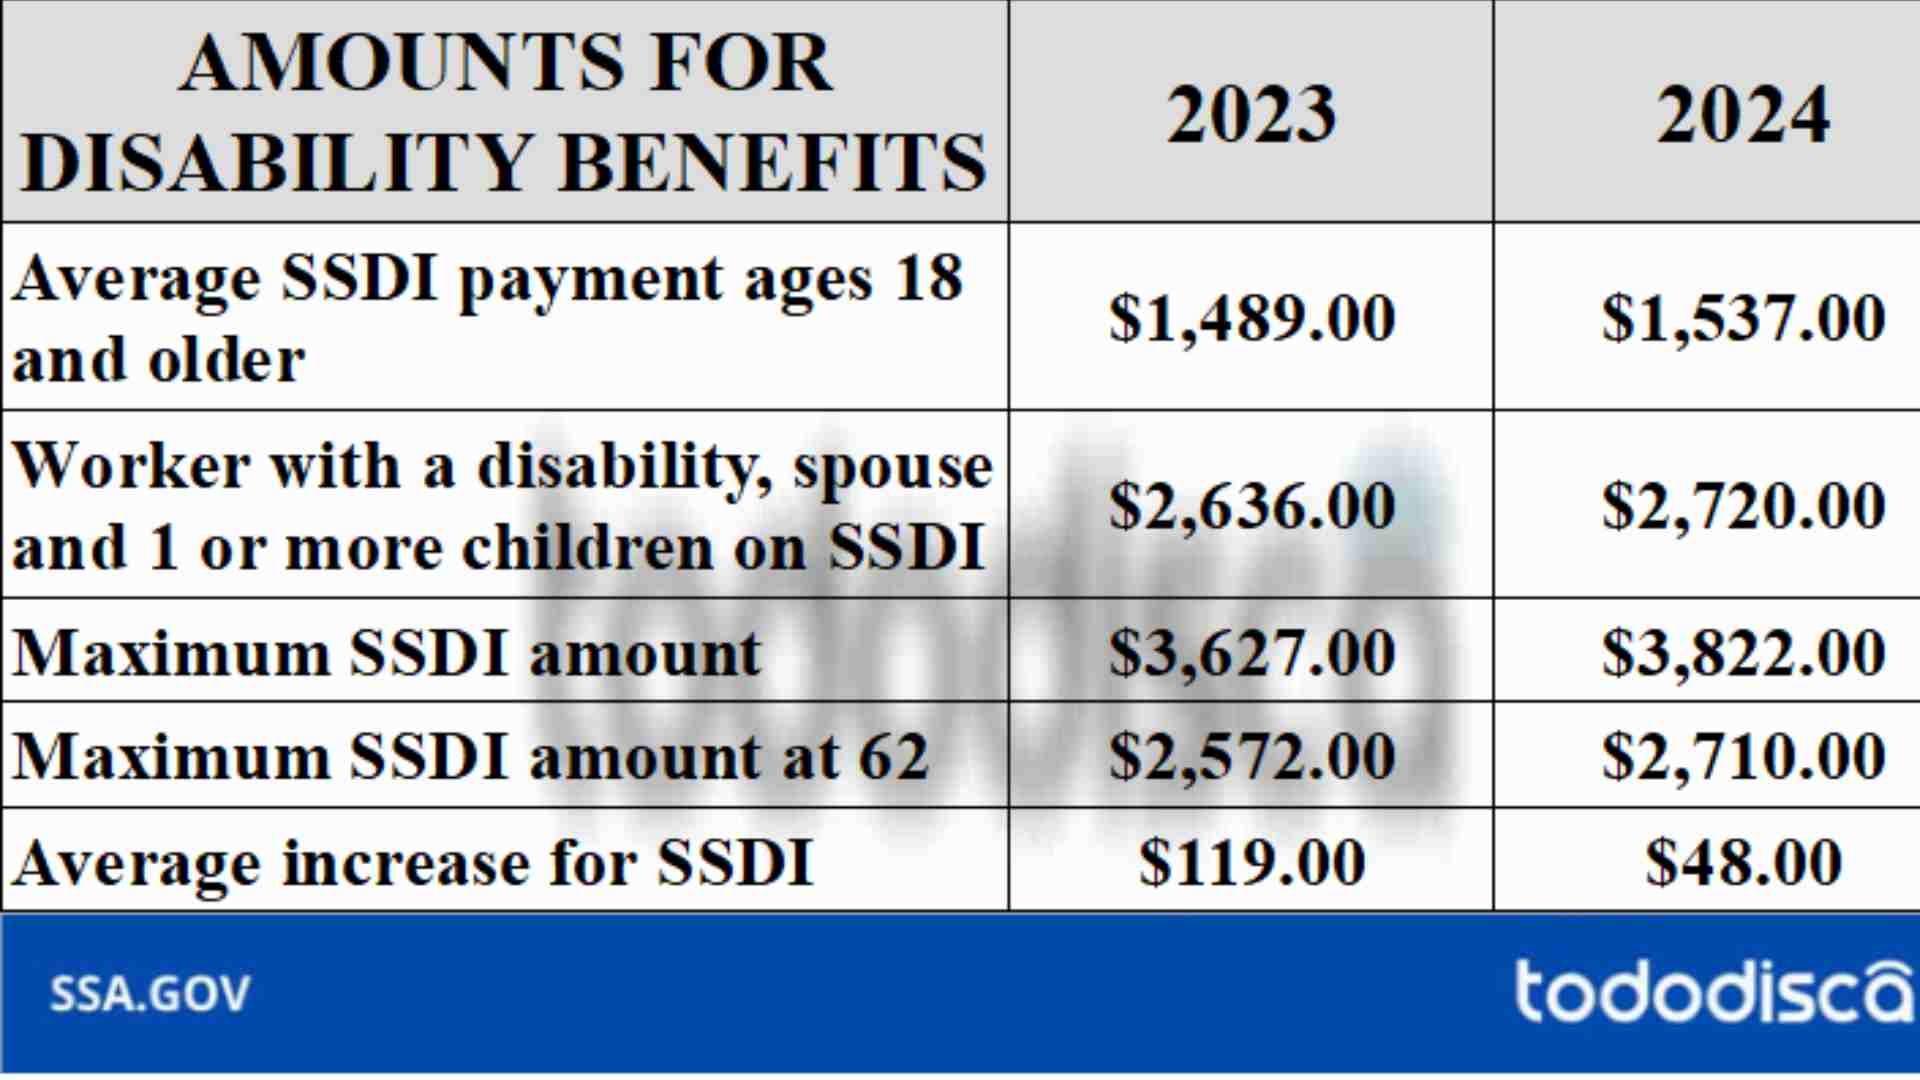 SSDI new amounts for Social Security payments in 2024